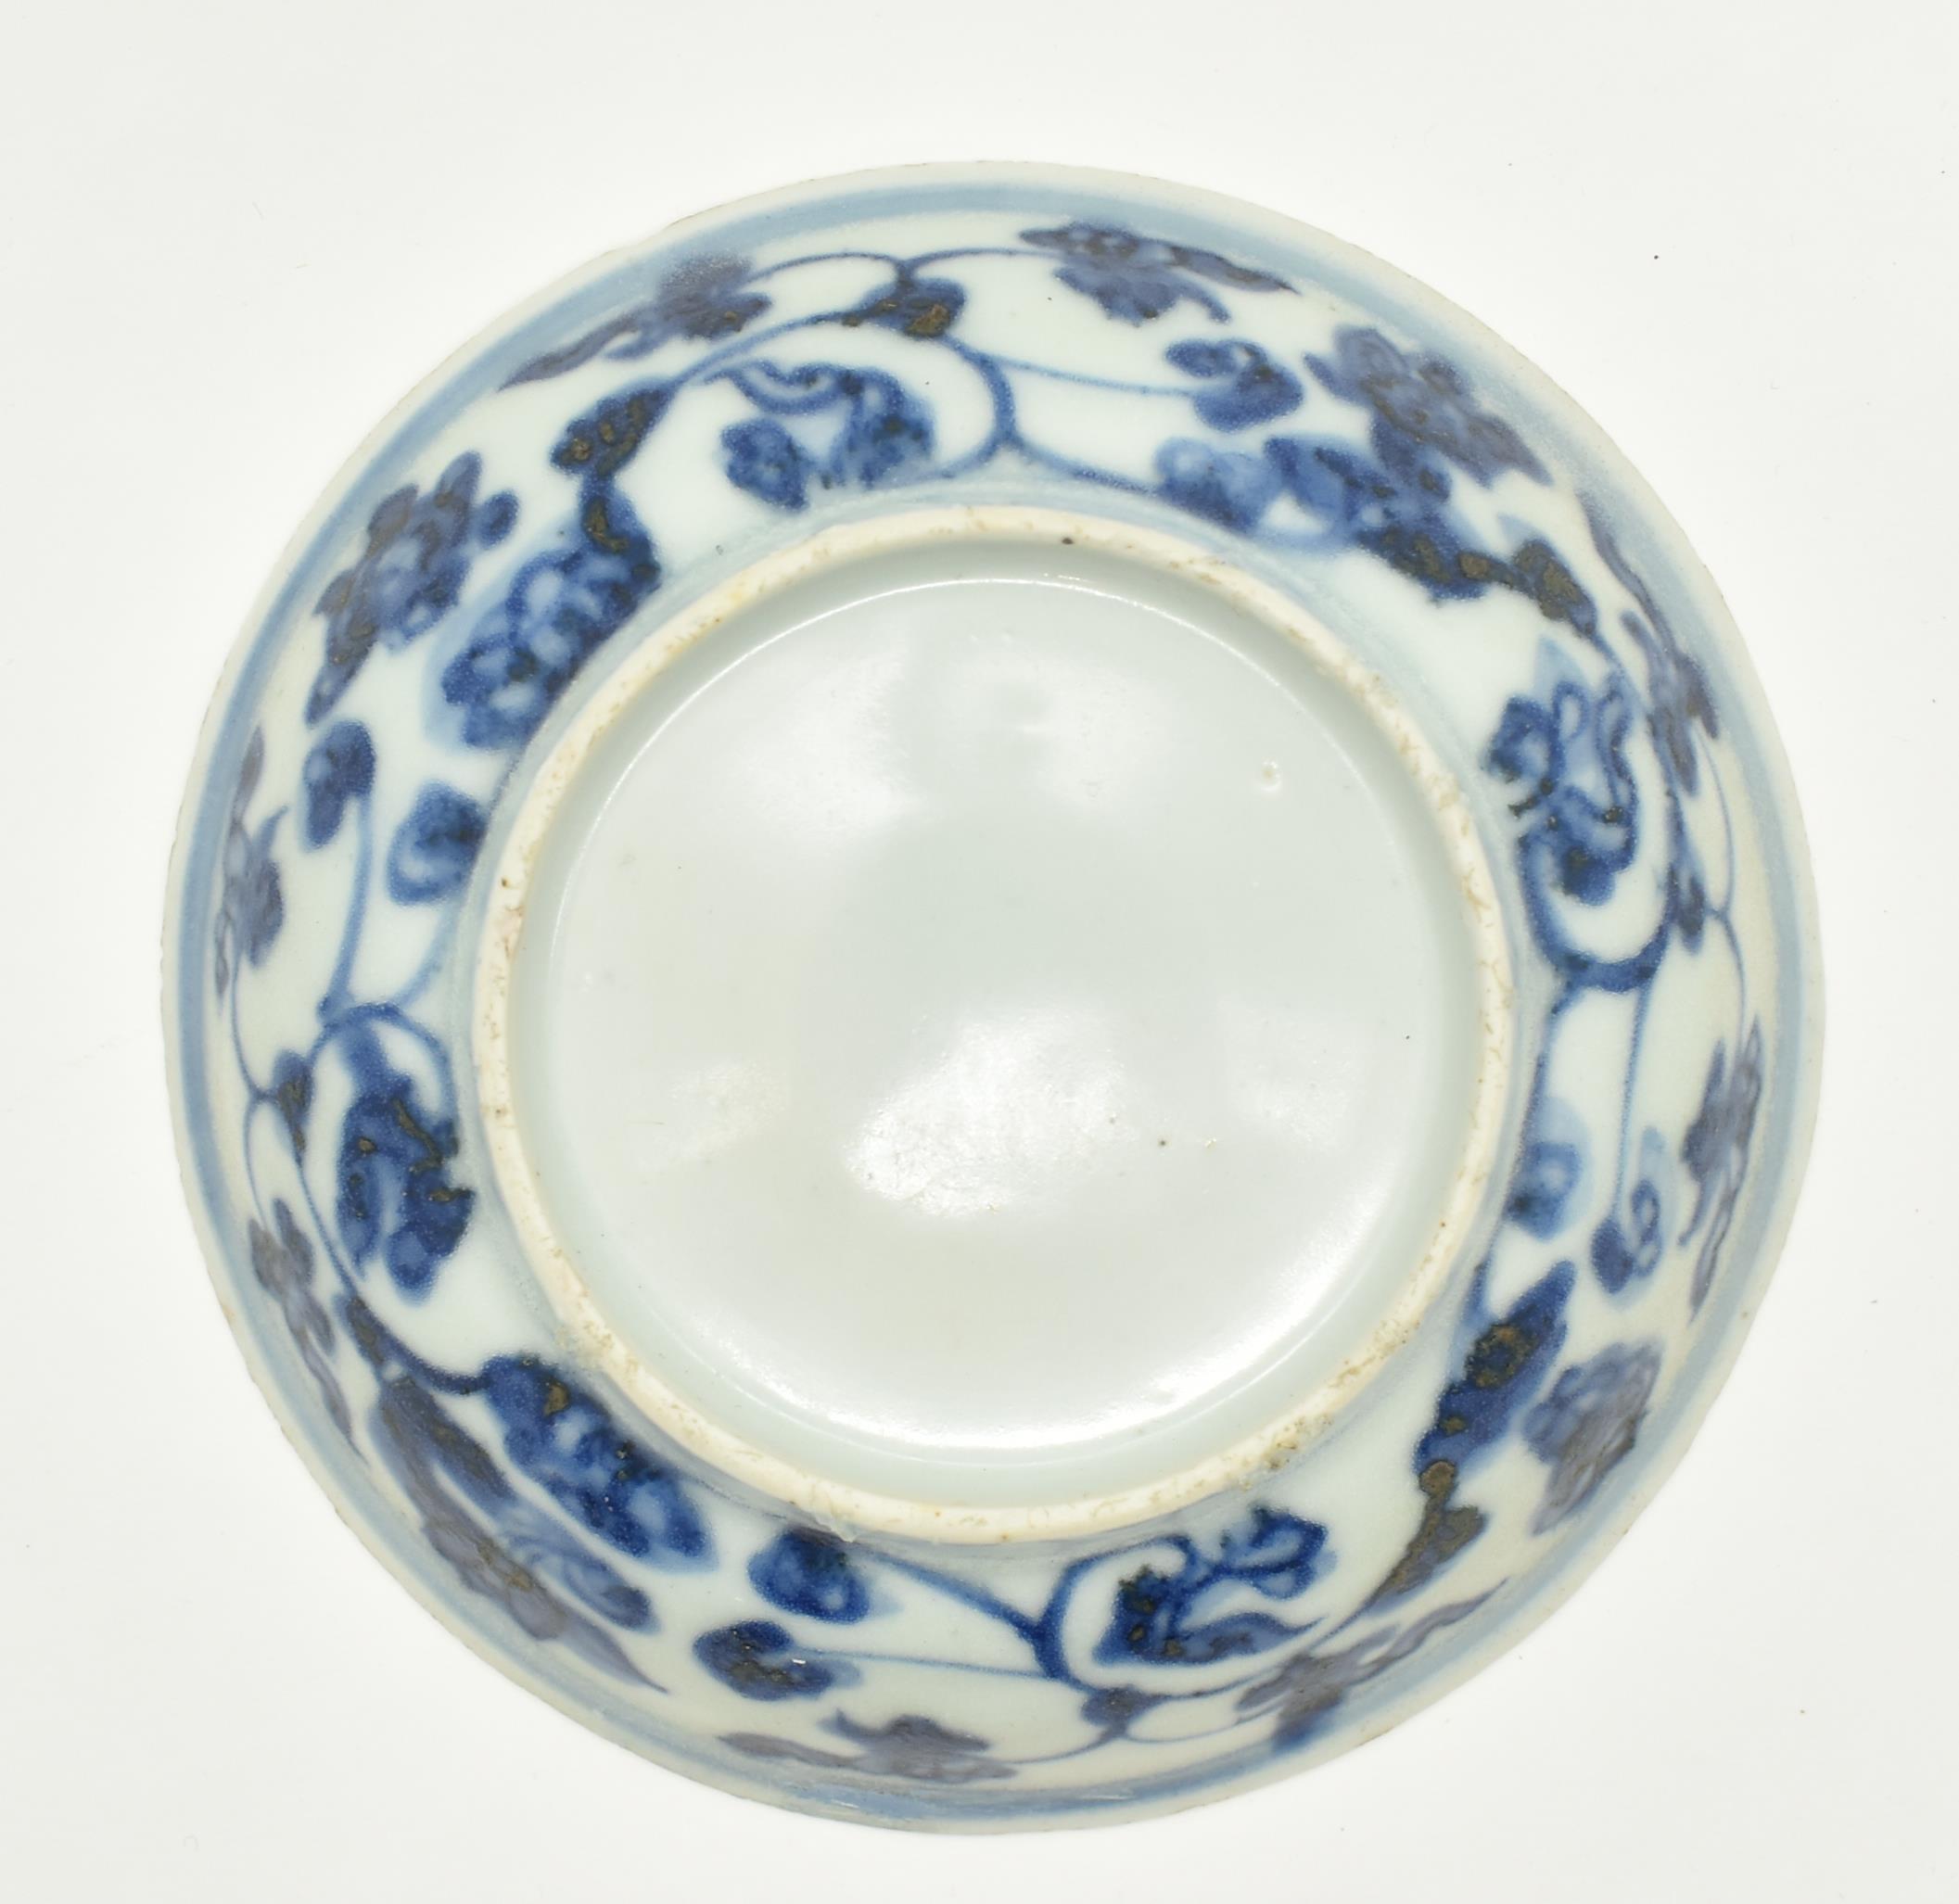 MING DYNASTY TRANSITIONAL BLUE AND WHITE PLATE 明 青花花卉碟 - Image 4 of 6